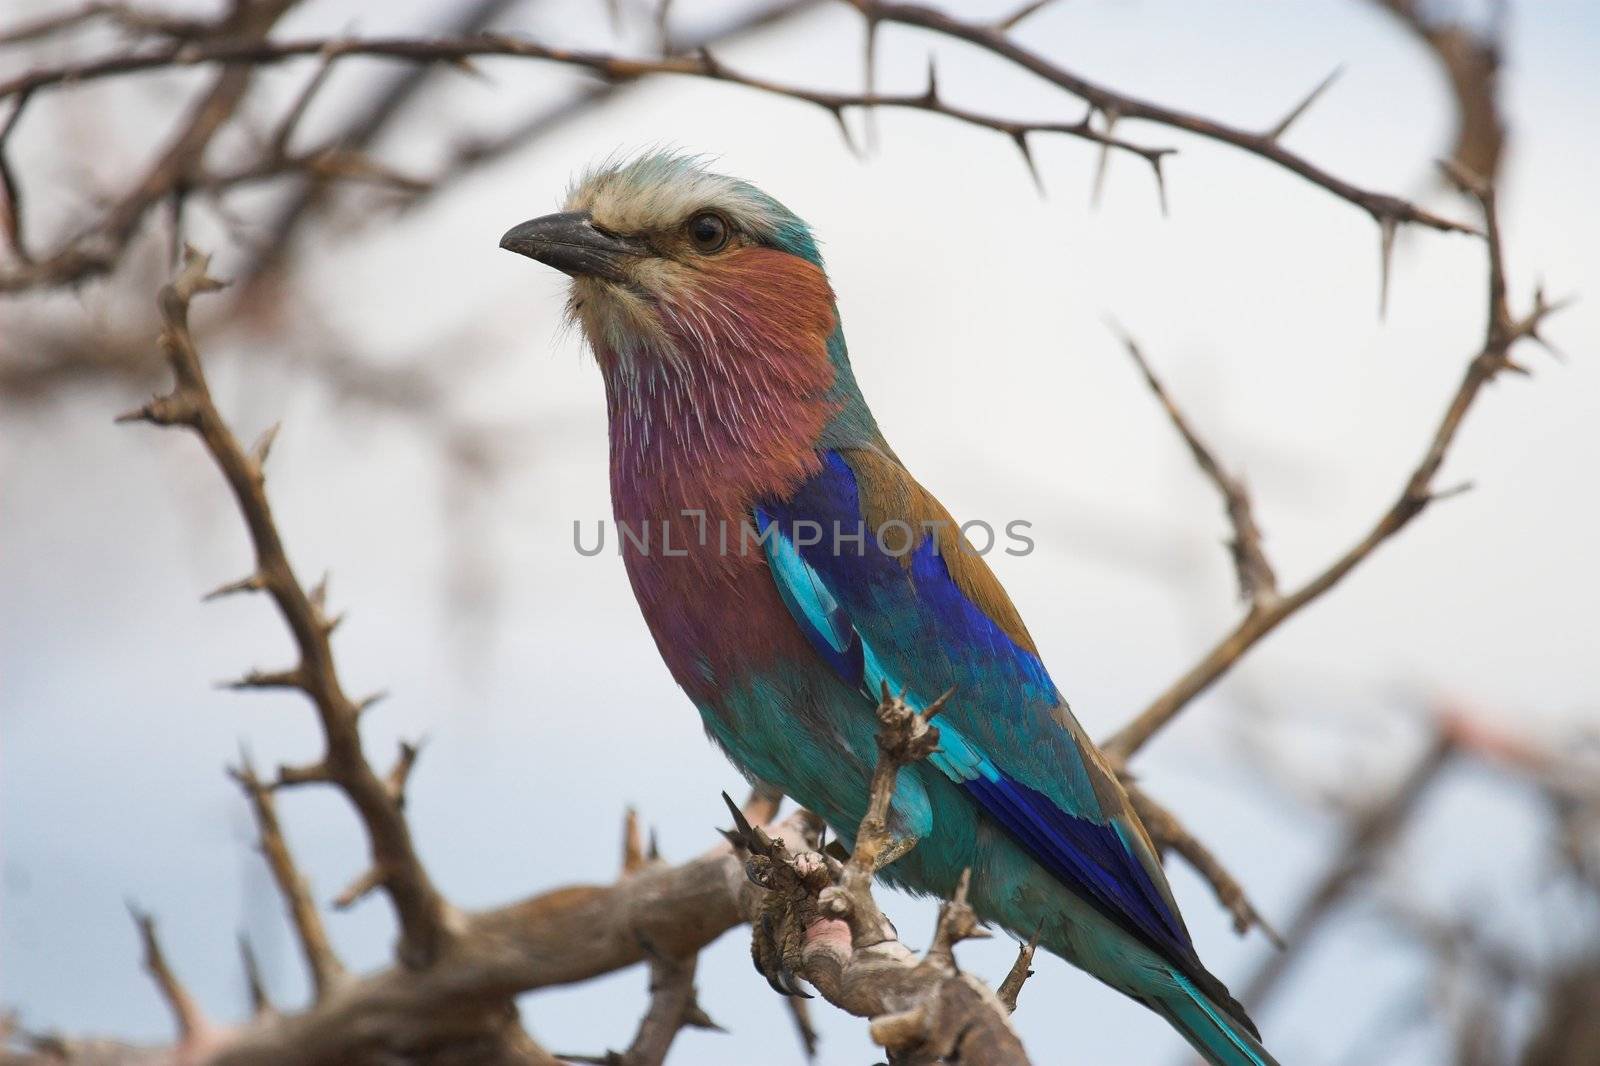 Lilac breasted roller sitting on a branch